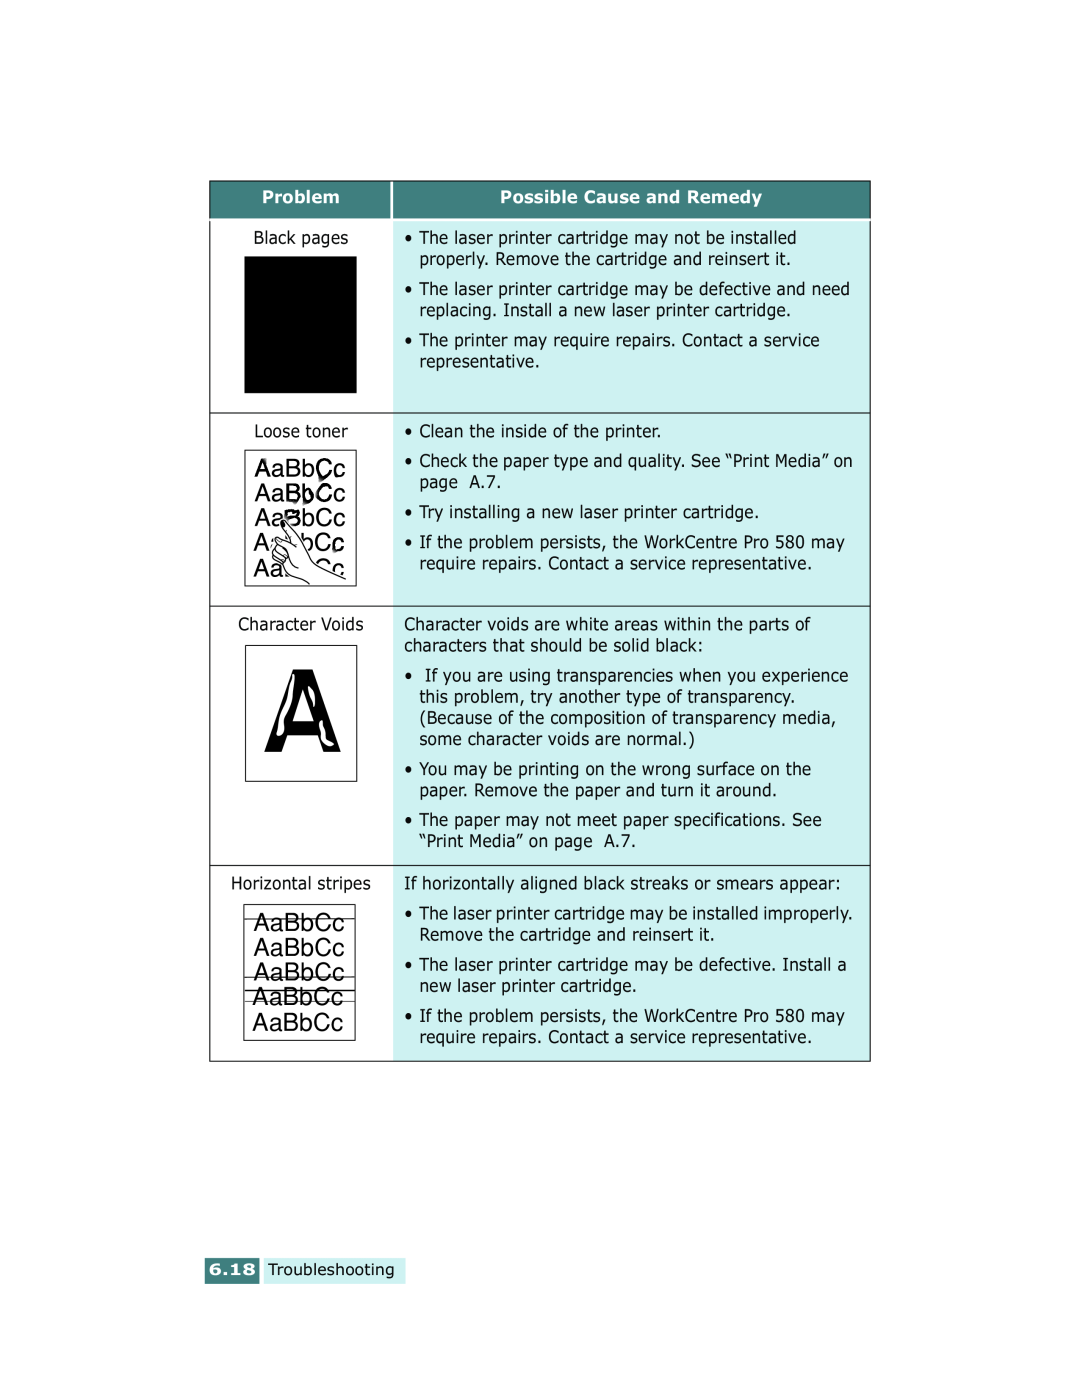 Xerox Pro 580 manual AaBbCc, Problem, Possible Cause and Remedy 